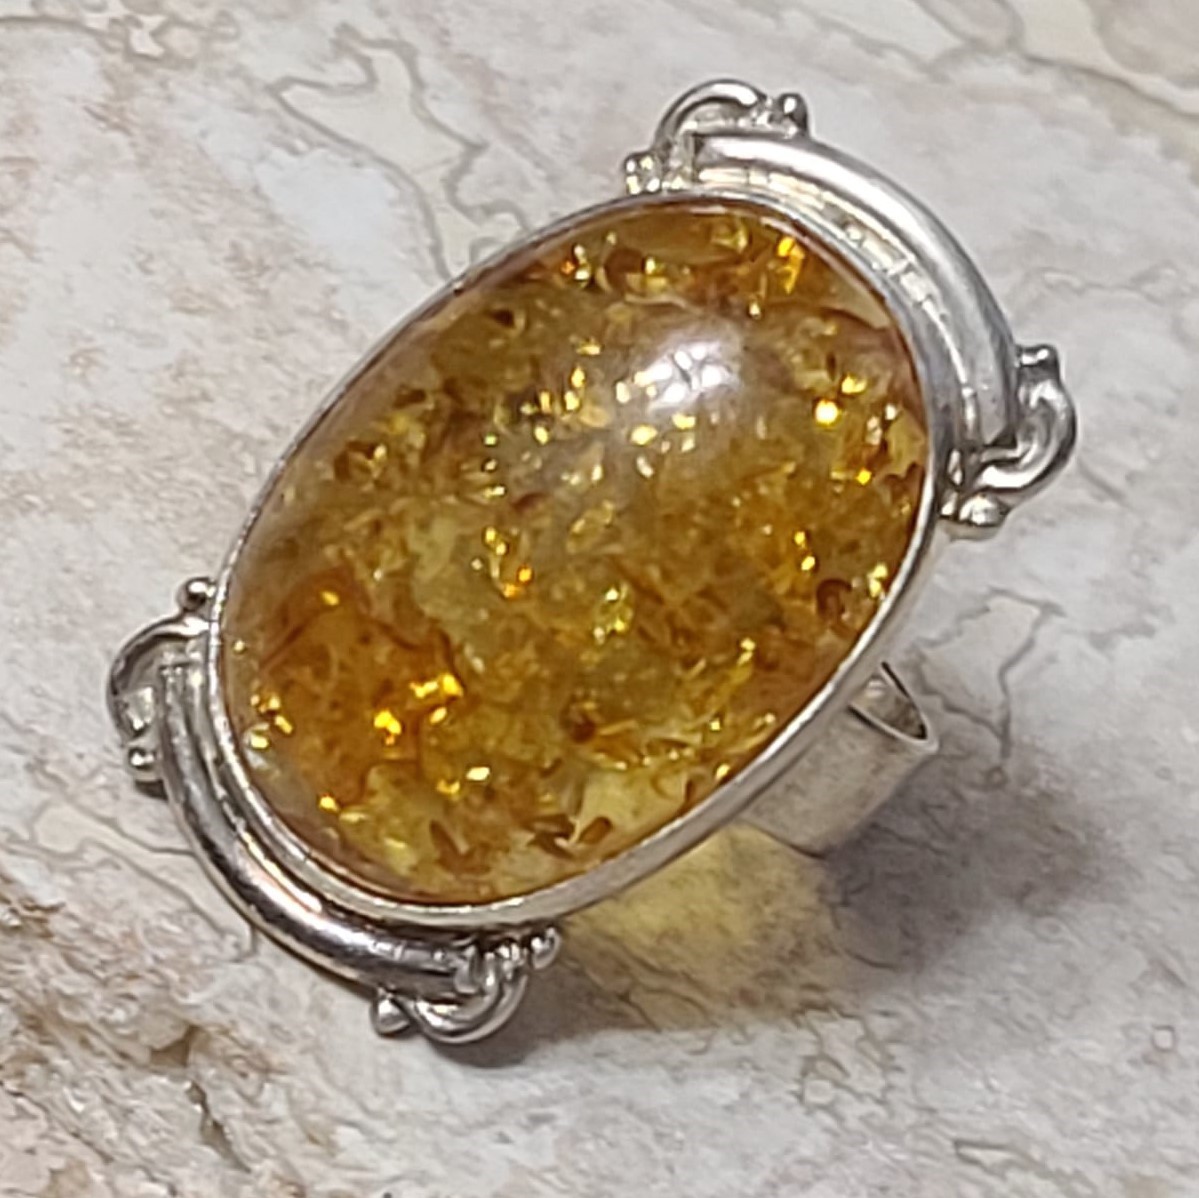 Amber Gemstone 925 Sterling Silver Ring Size 8 3/4"